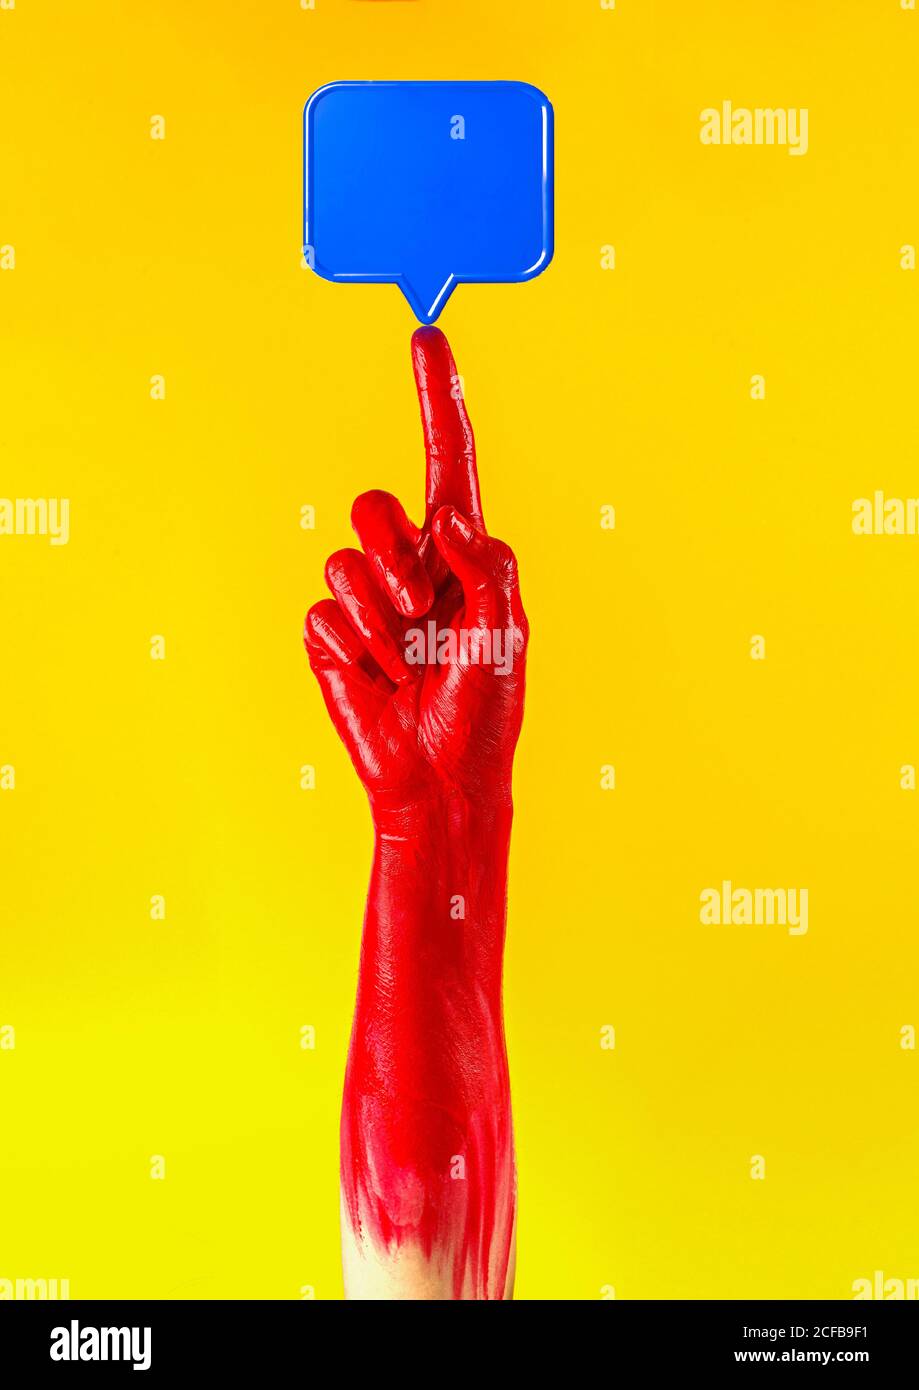 Crop person with red painted hand holding though balloon symbol on point up finger in studio on yellow background Stock Photo